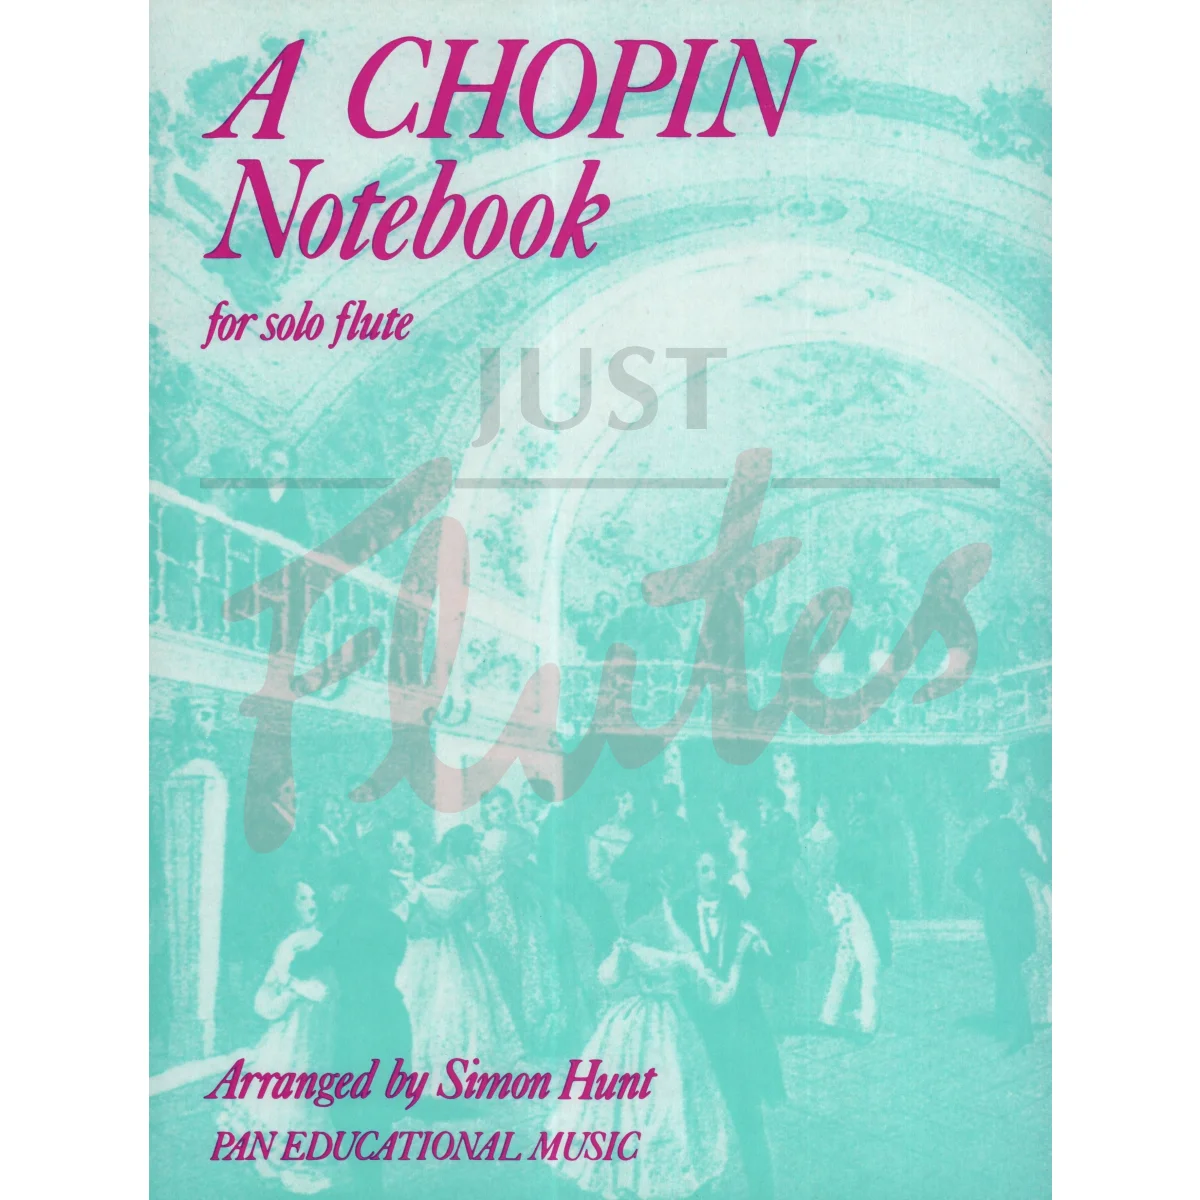 A Chopin Notebook for Solo Flute